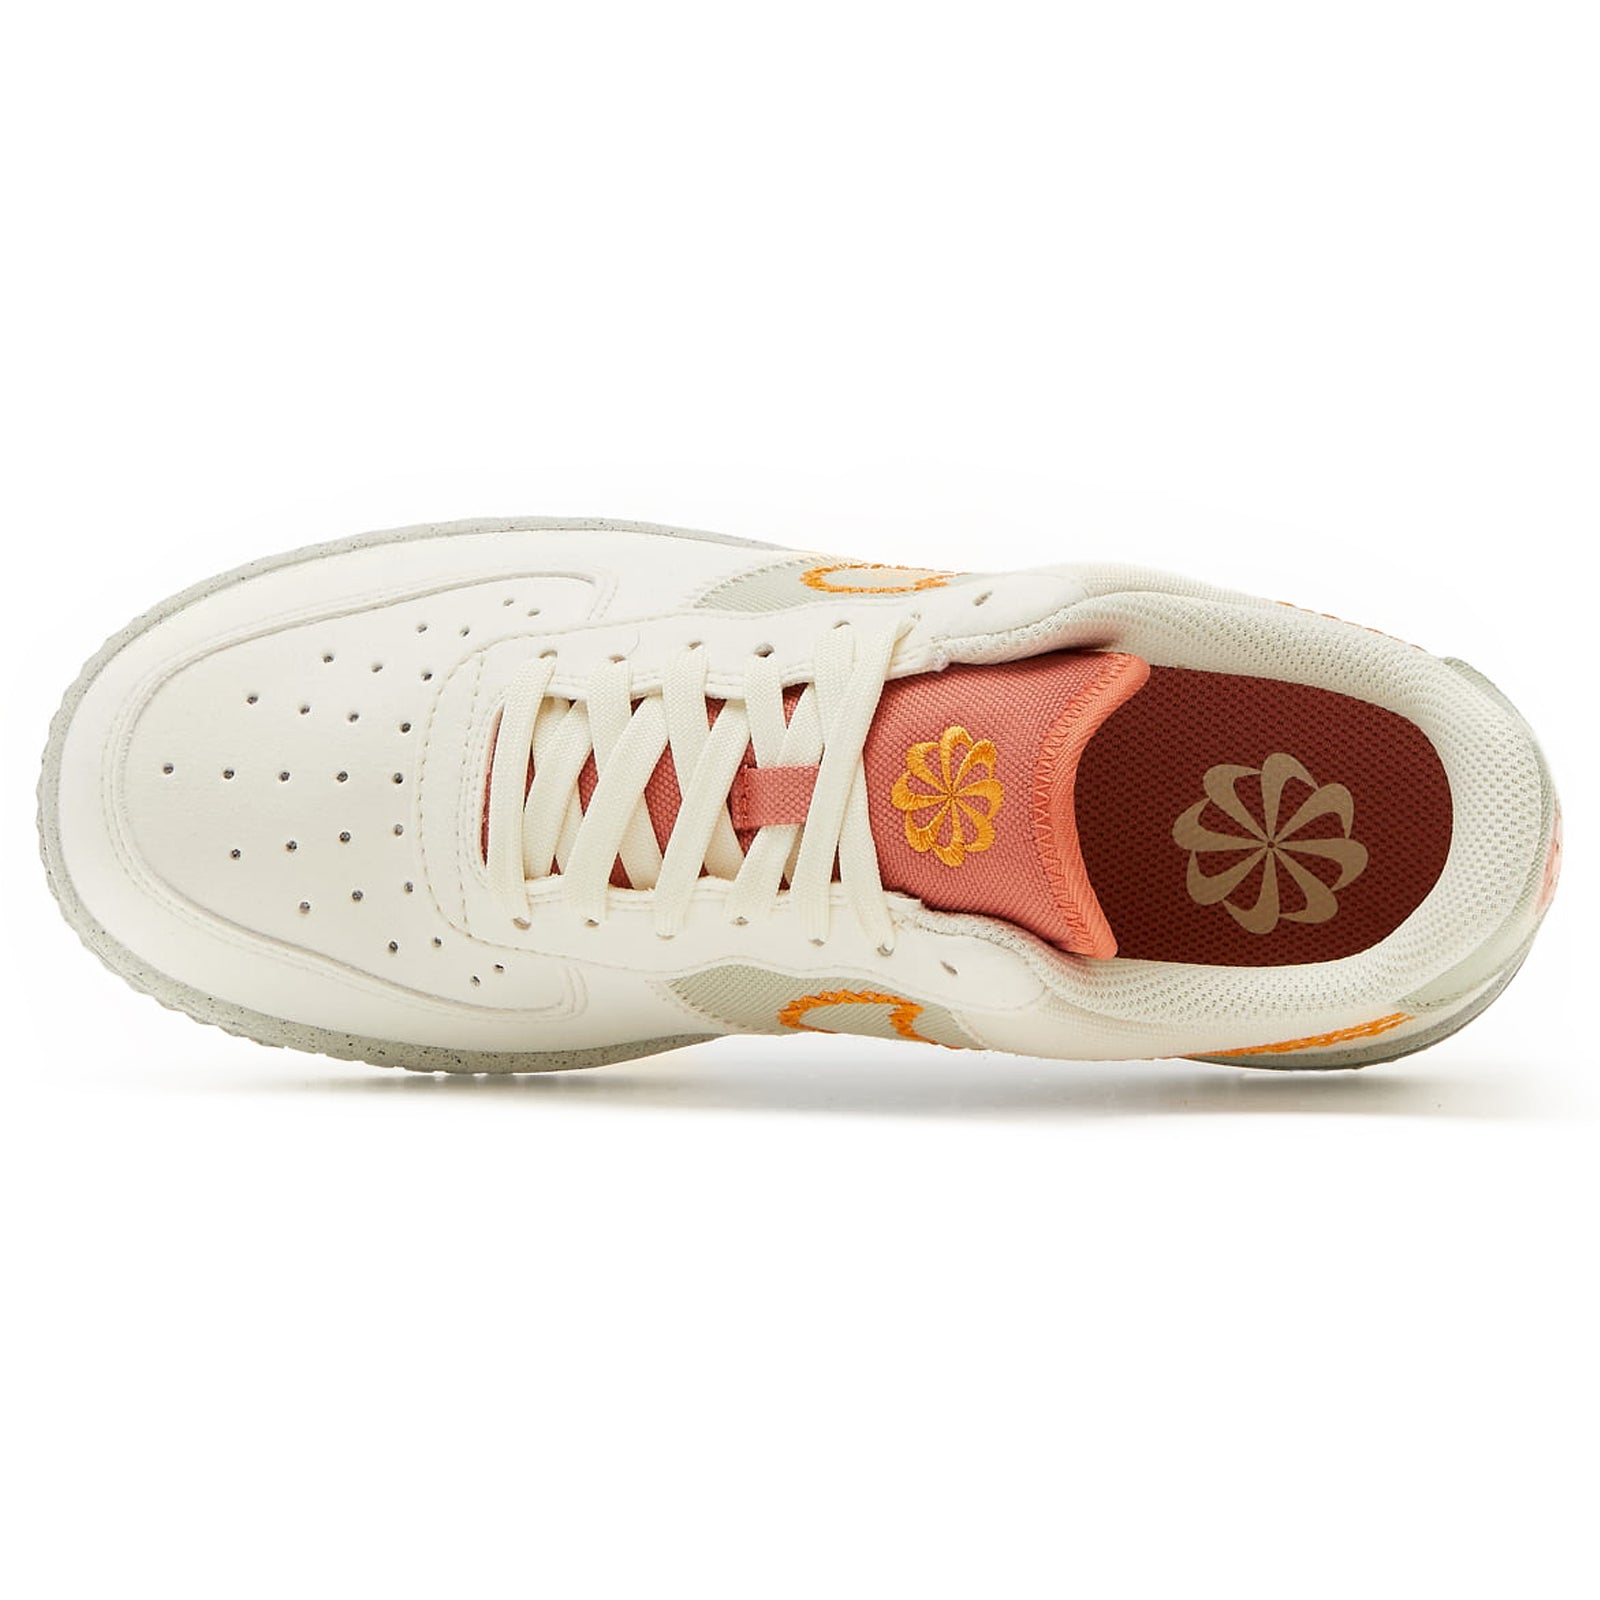 Nike Womens Trainers Air Force 1 07 Low-Top - UK 5